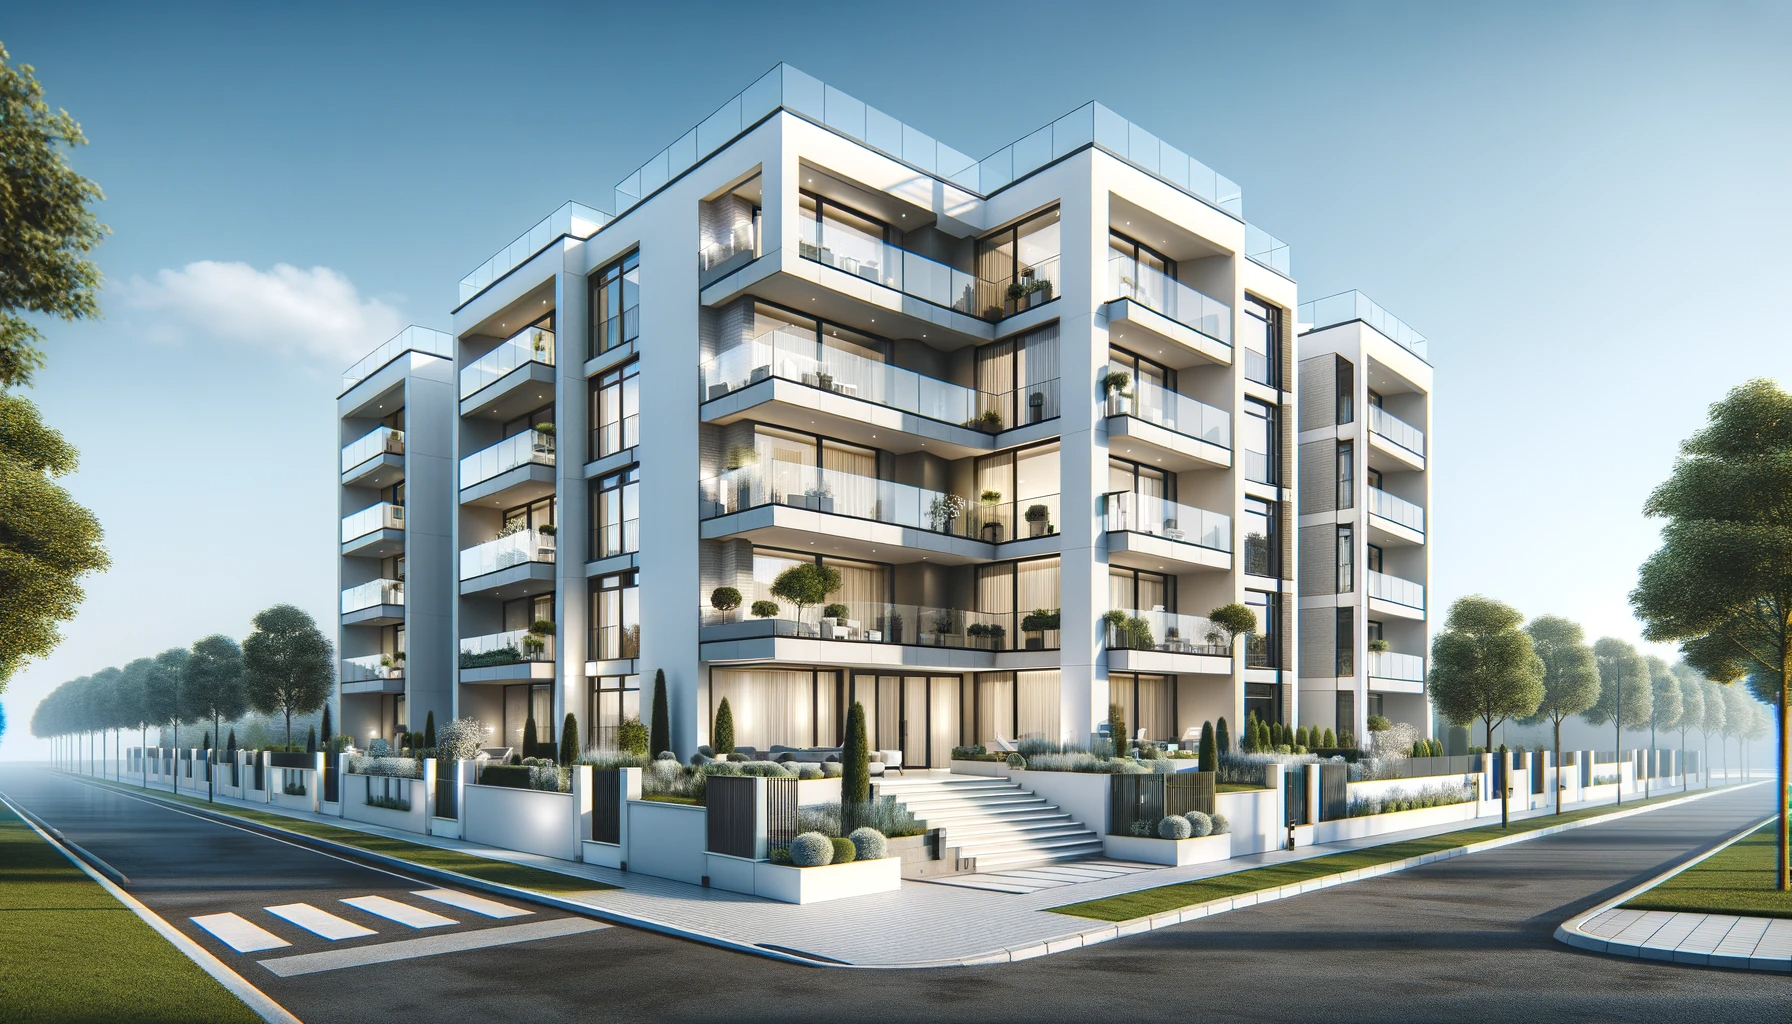 DALL·E 2023-11-02 18.01.16 - A wide architectural rendering of a contemporary, private European-style apartment building with a maximum of three floors. The building should featur